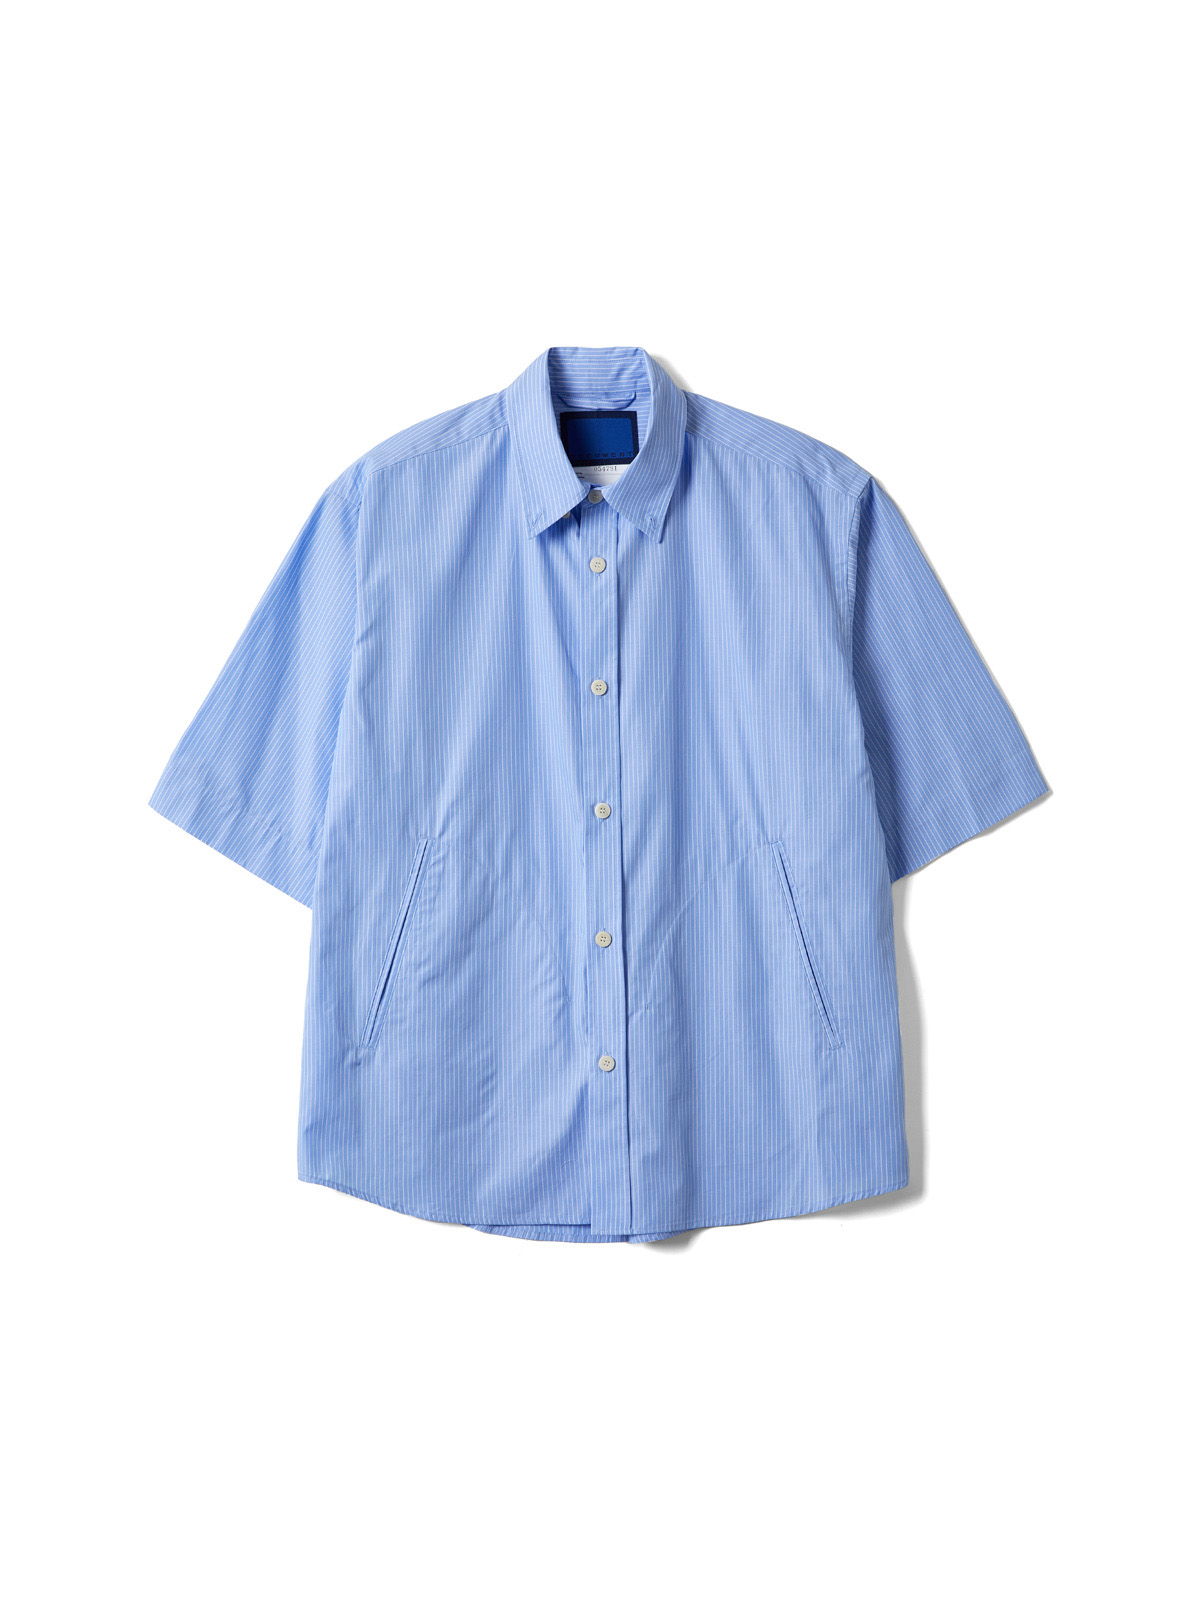 60S COTTON RELAXED BUTTON DOWN SHIRT (BLUE STRIPE)